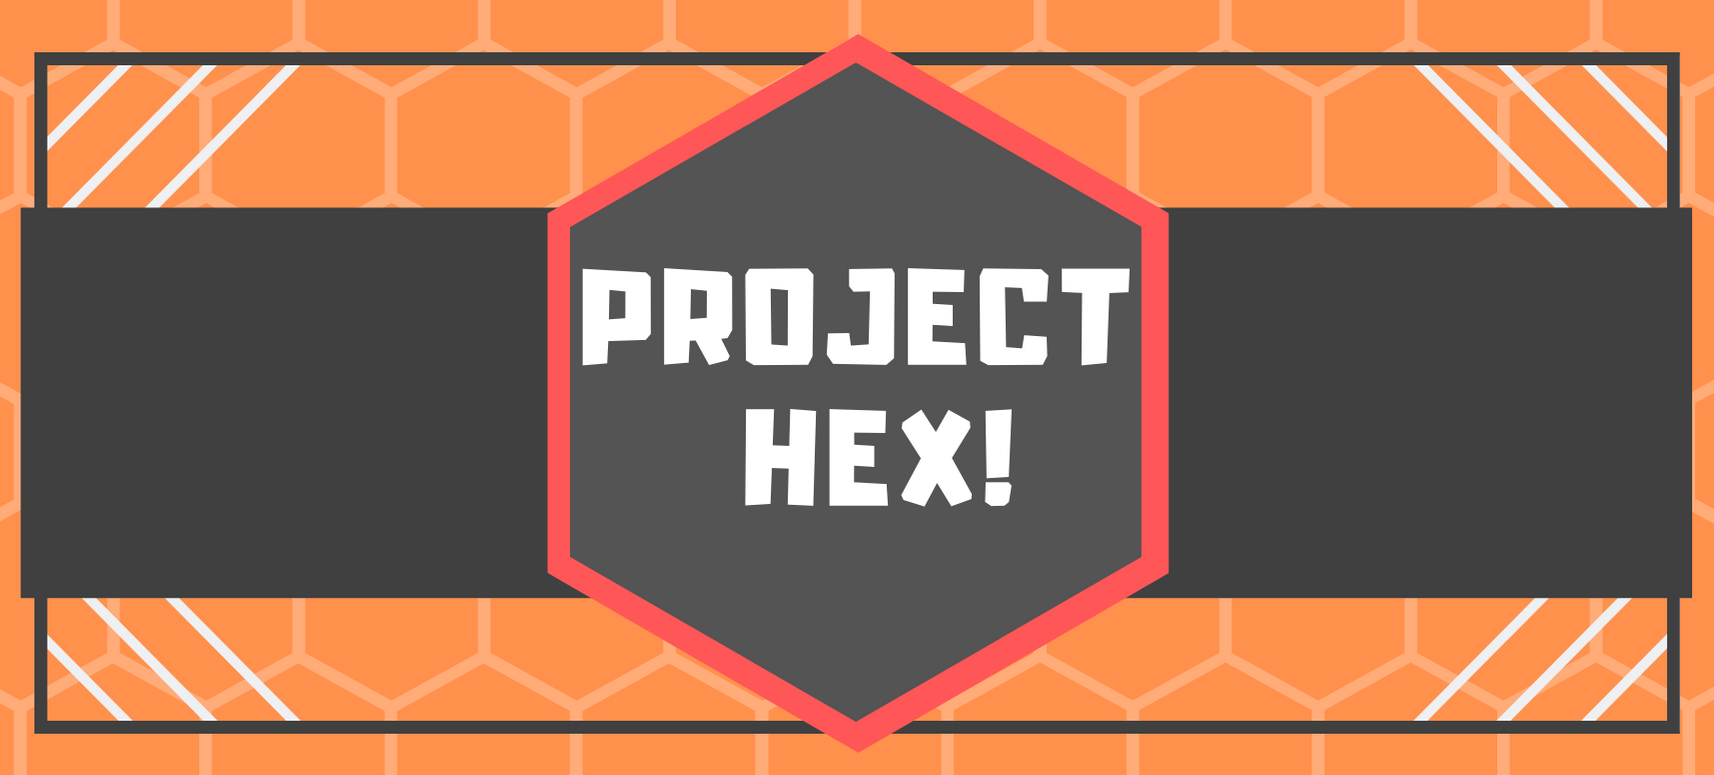 Project Hex!